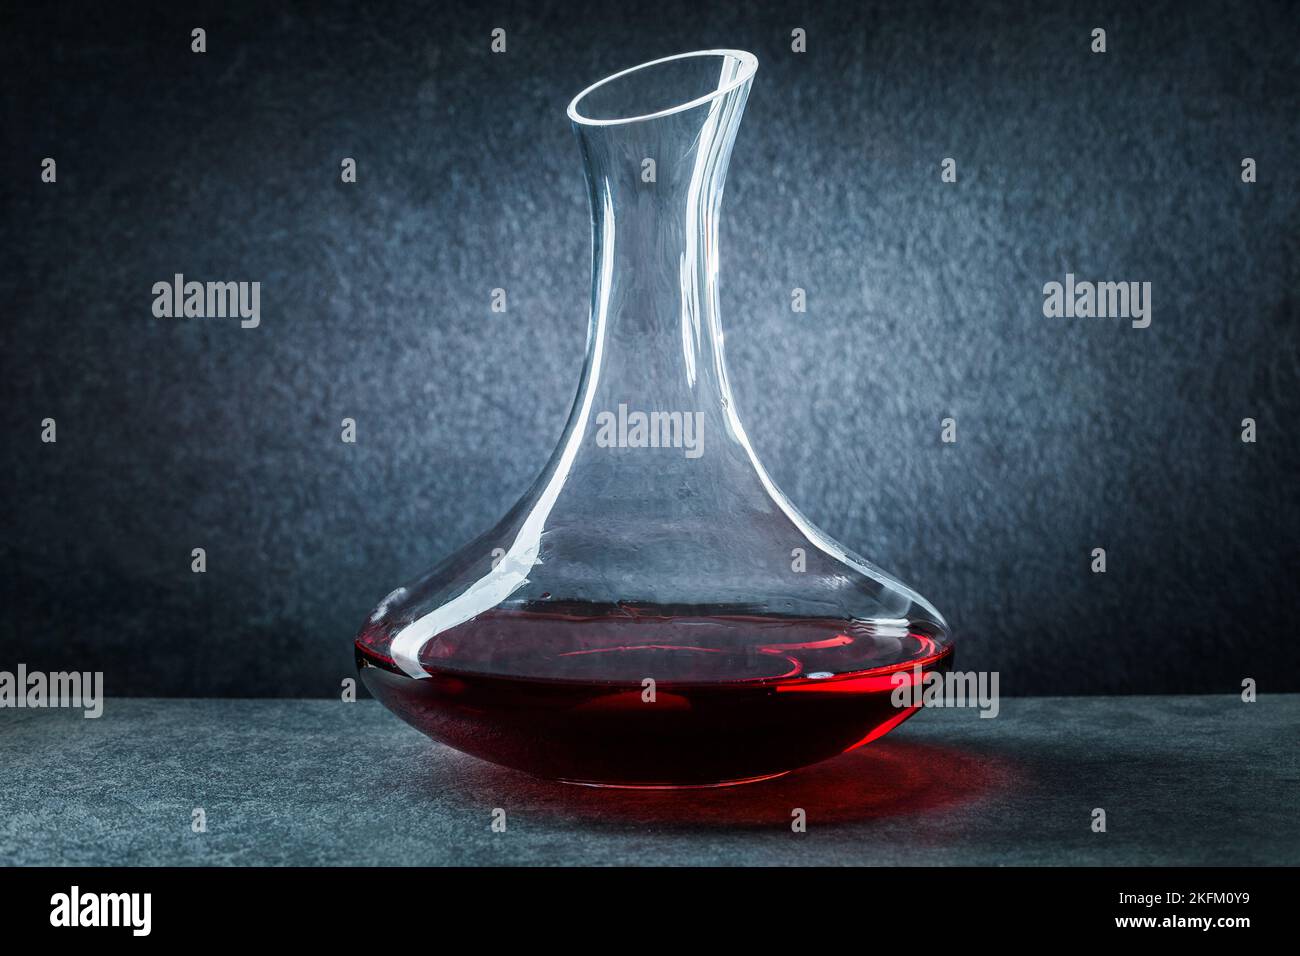 classic glass decanter with red wine on black background Stock Photo